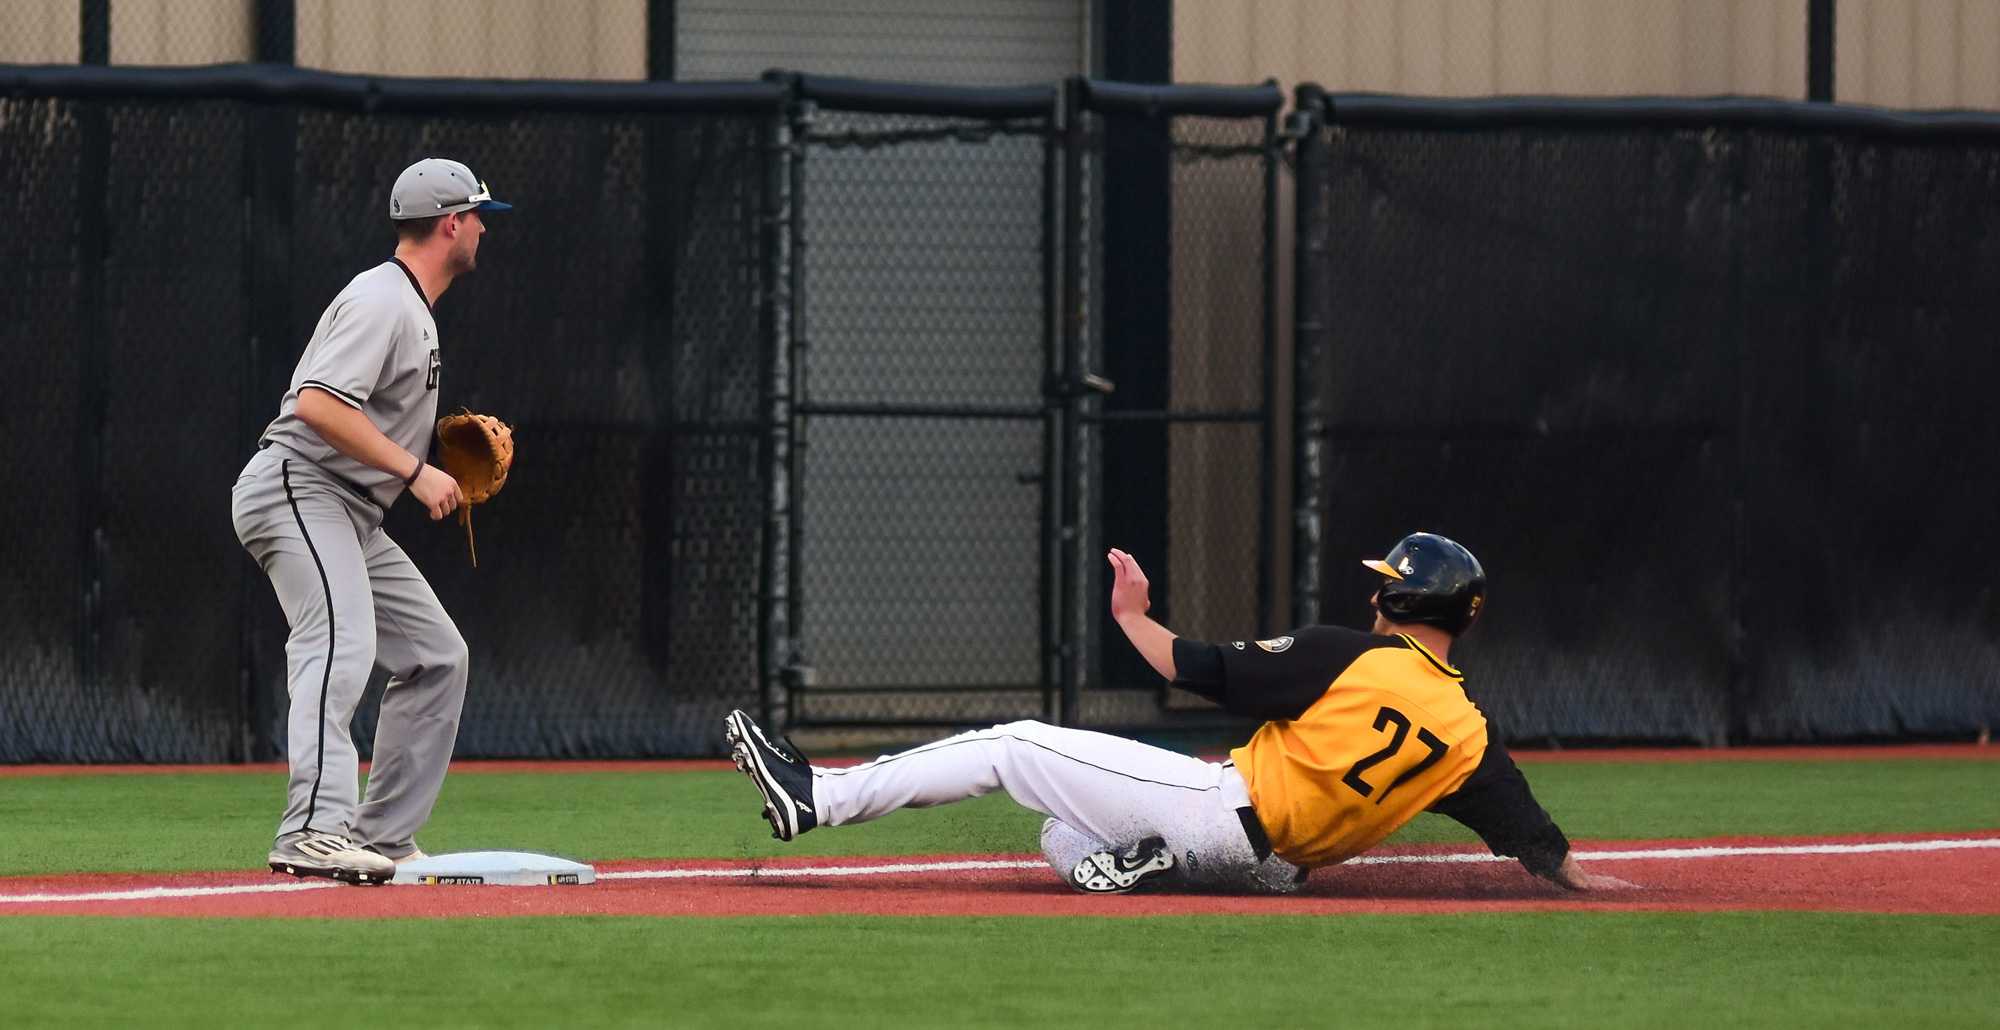 Senior infielder Grayson Atwood slides to third base. Photo by Dallas Linger, Photo Editor.